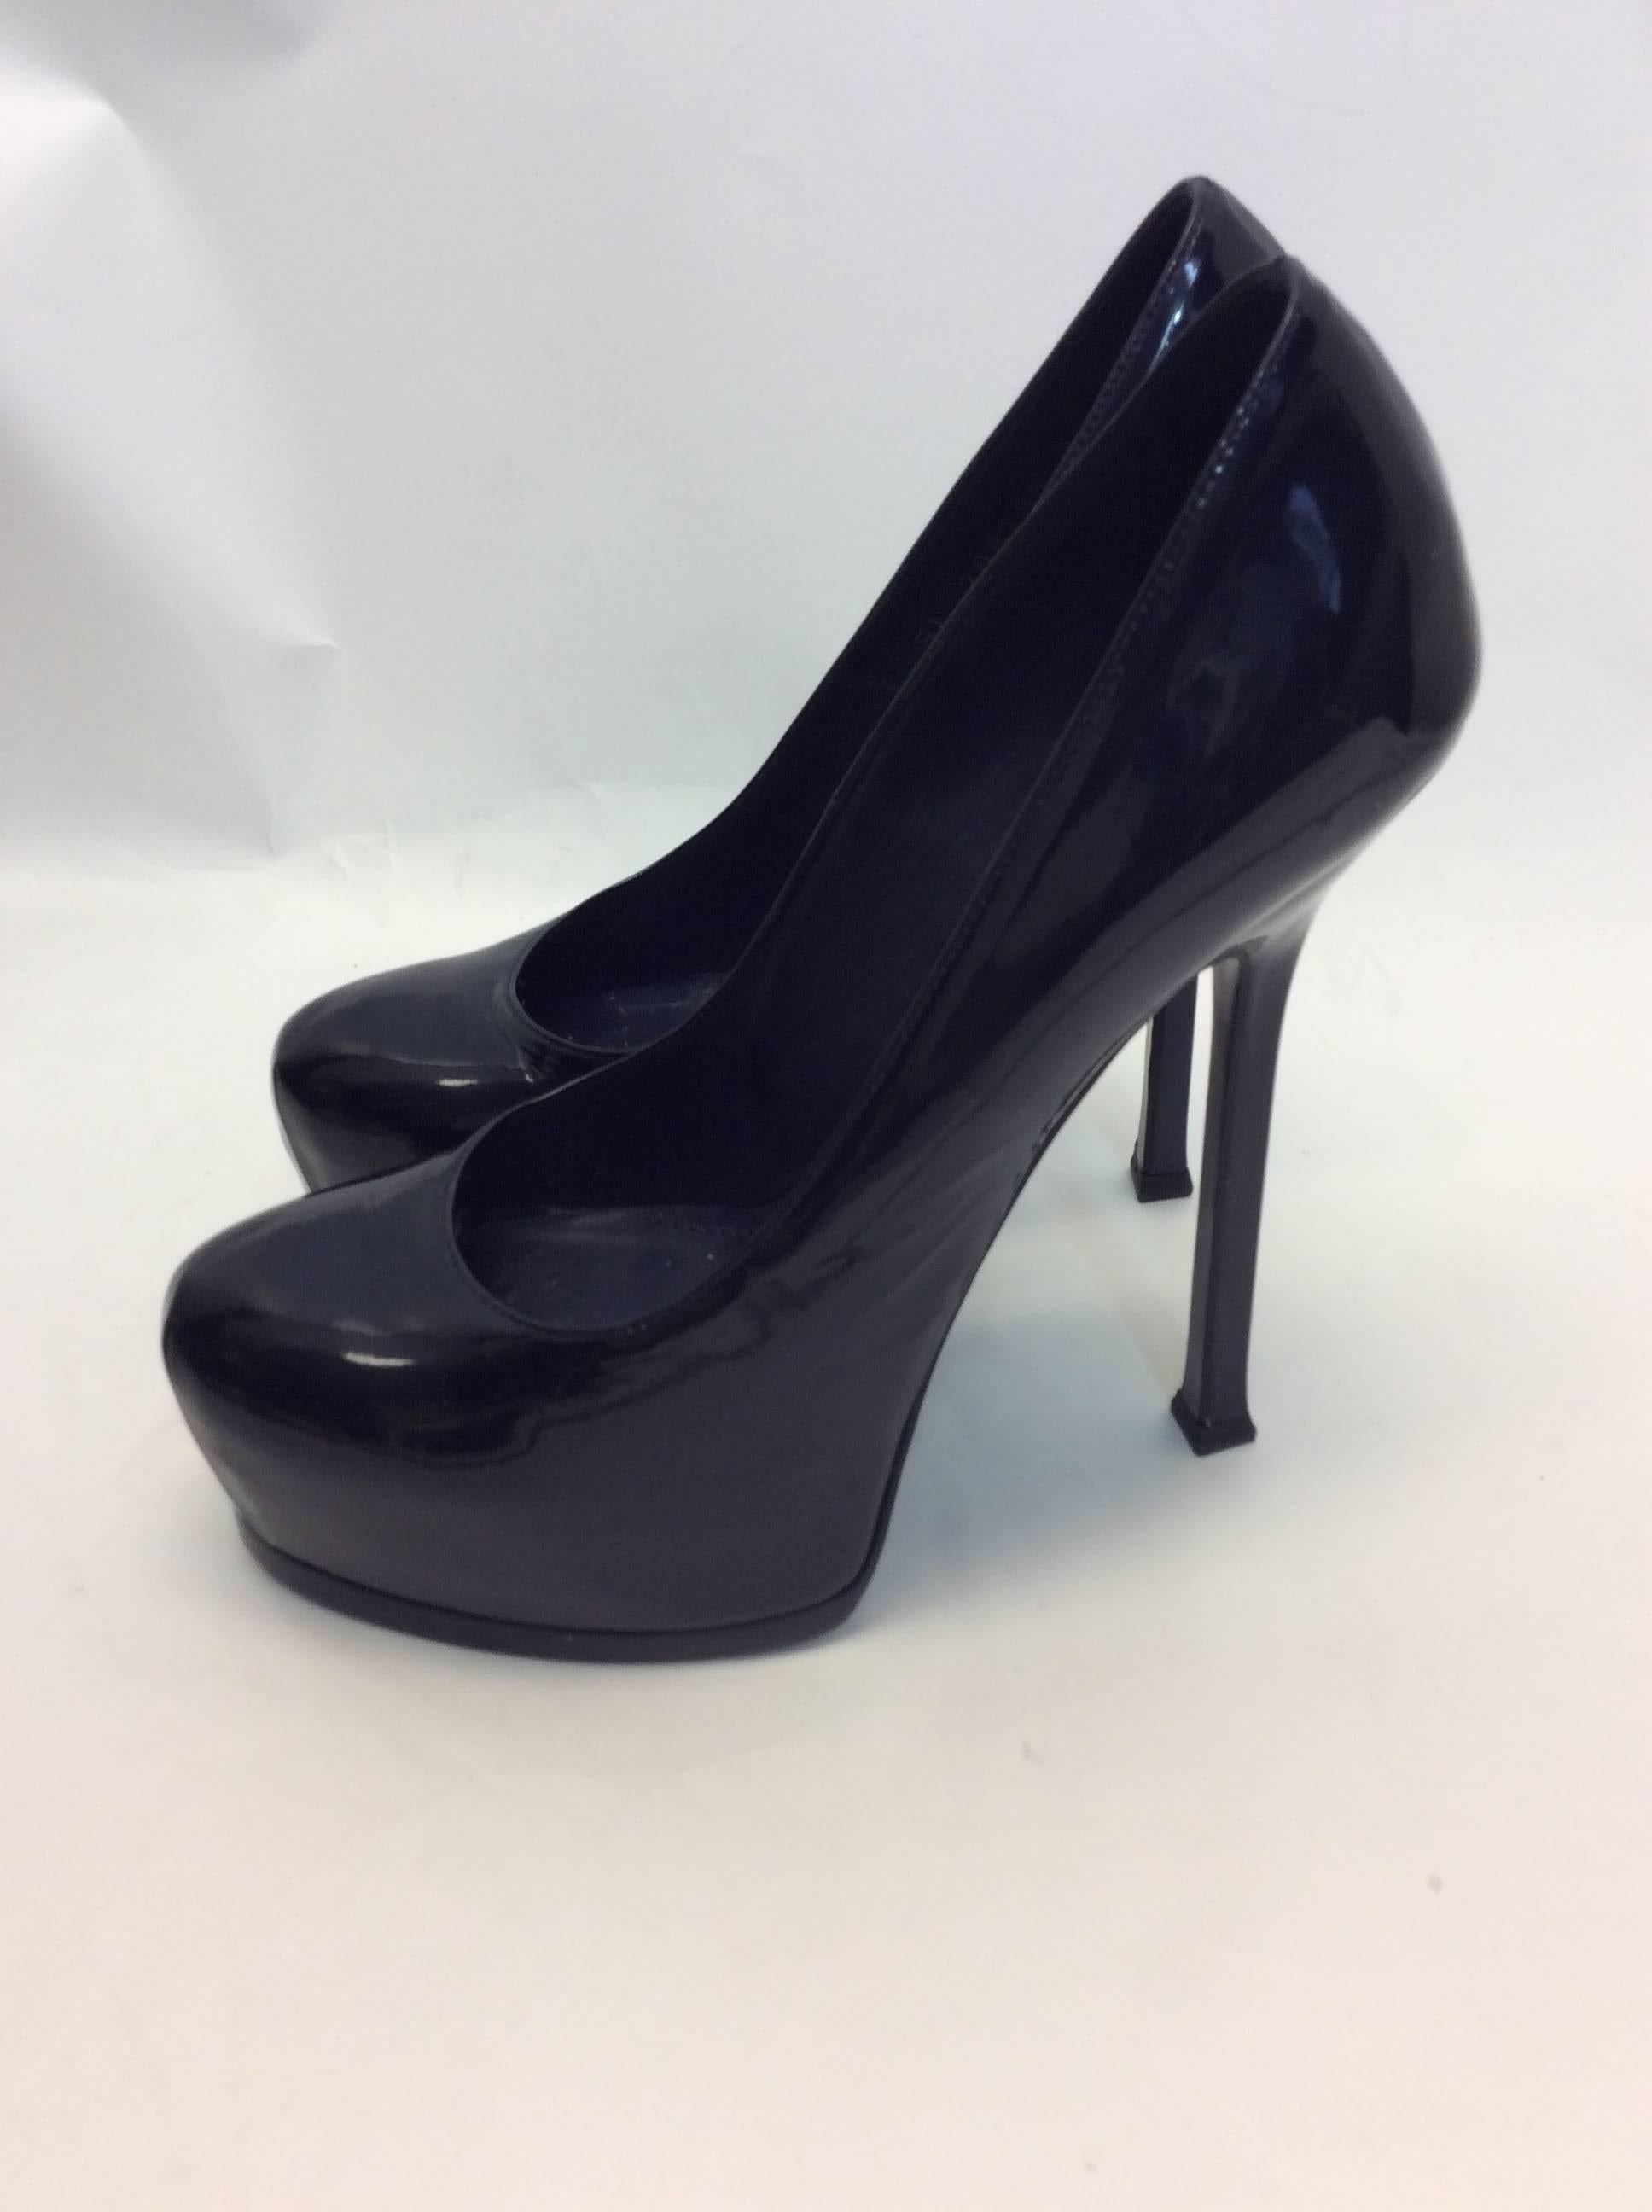 YSL Navy Patent Leather Pumps 
5.25 heel
Made in Italy
Size 37
$350
